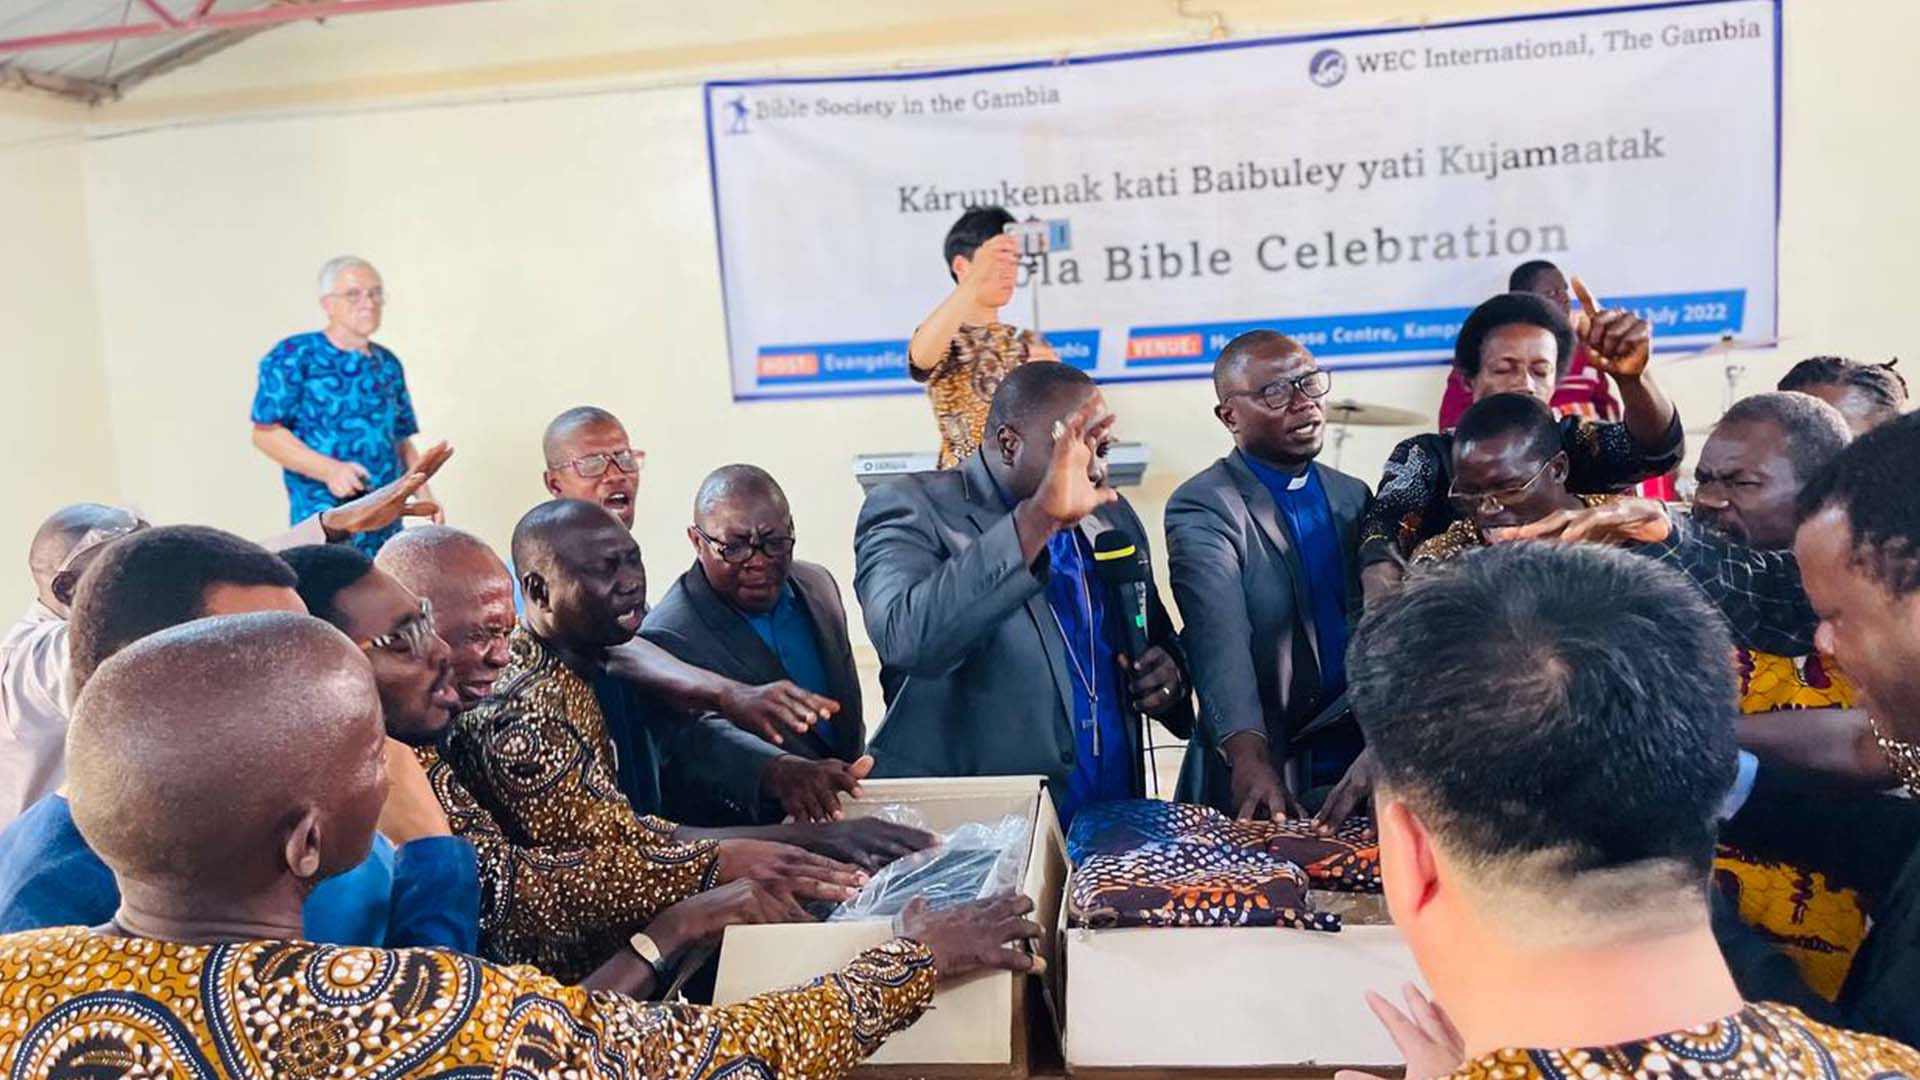 Songs of praise in The Gambia as the Jola people receive their Bible